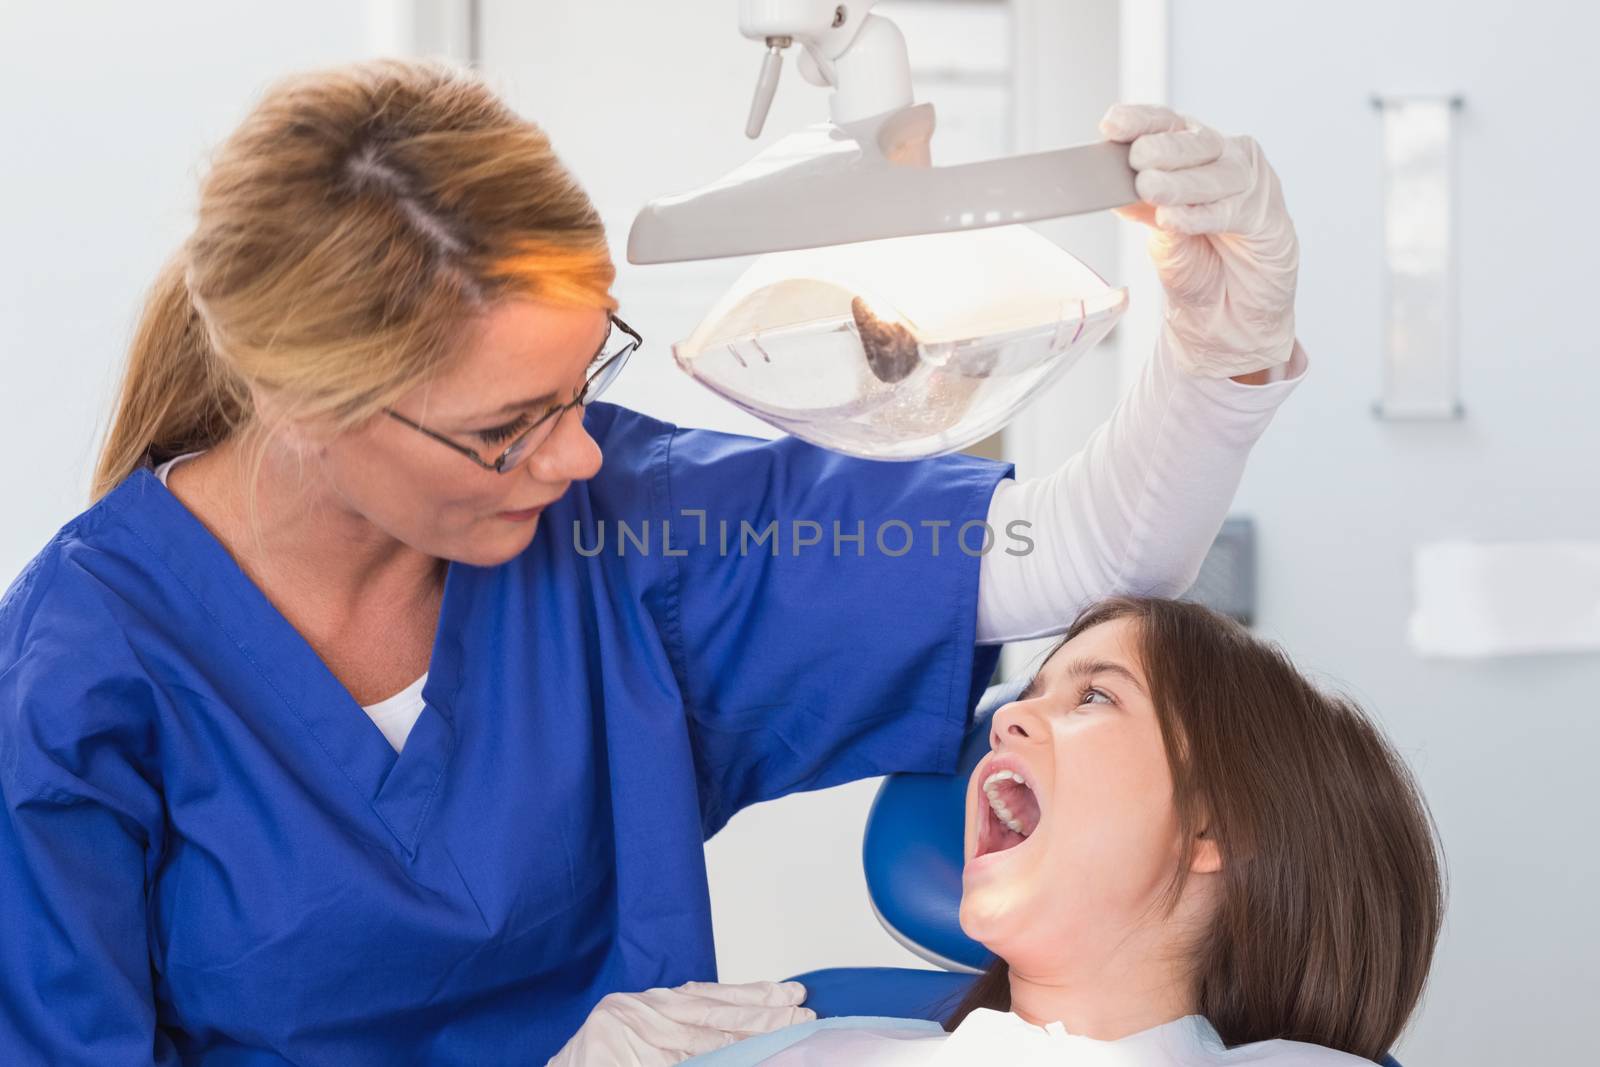 Pediatric dentist examining with a light her young patient in dental clinic